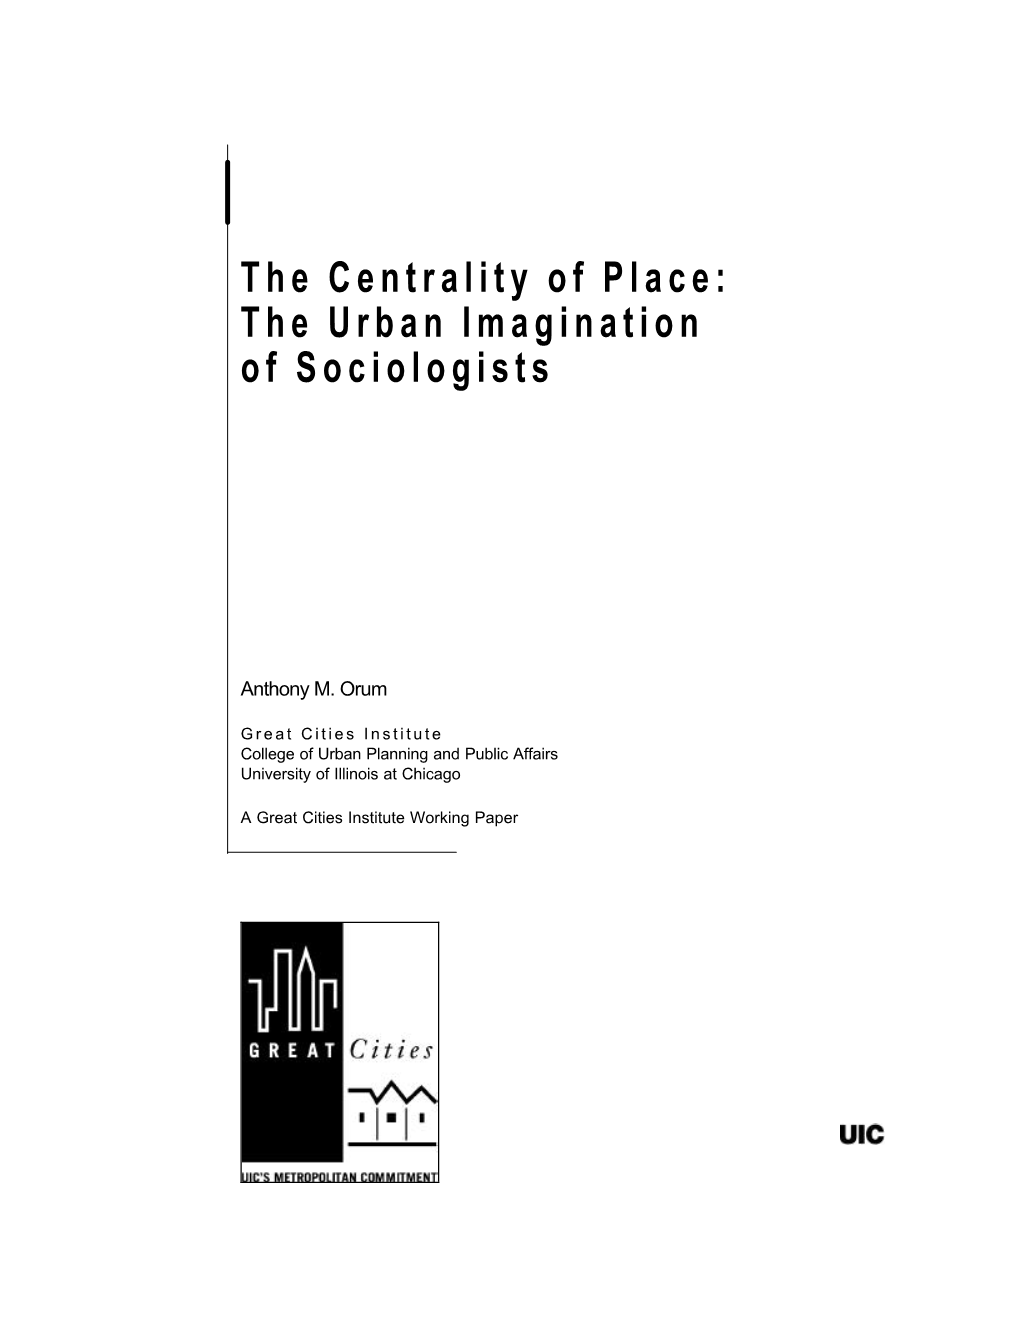 The Centrality of Place: the Urban Imagination of Sociologists